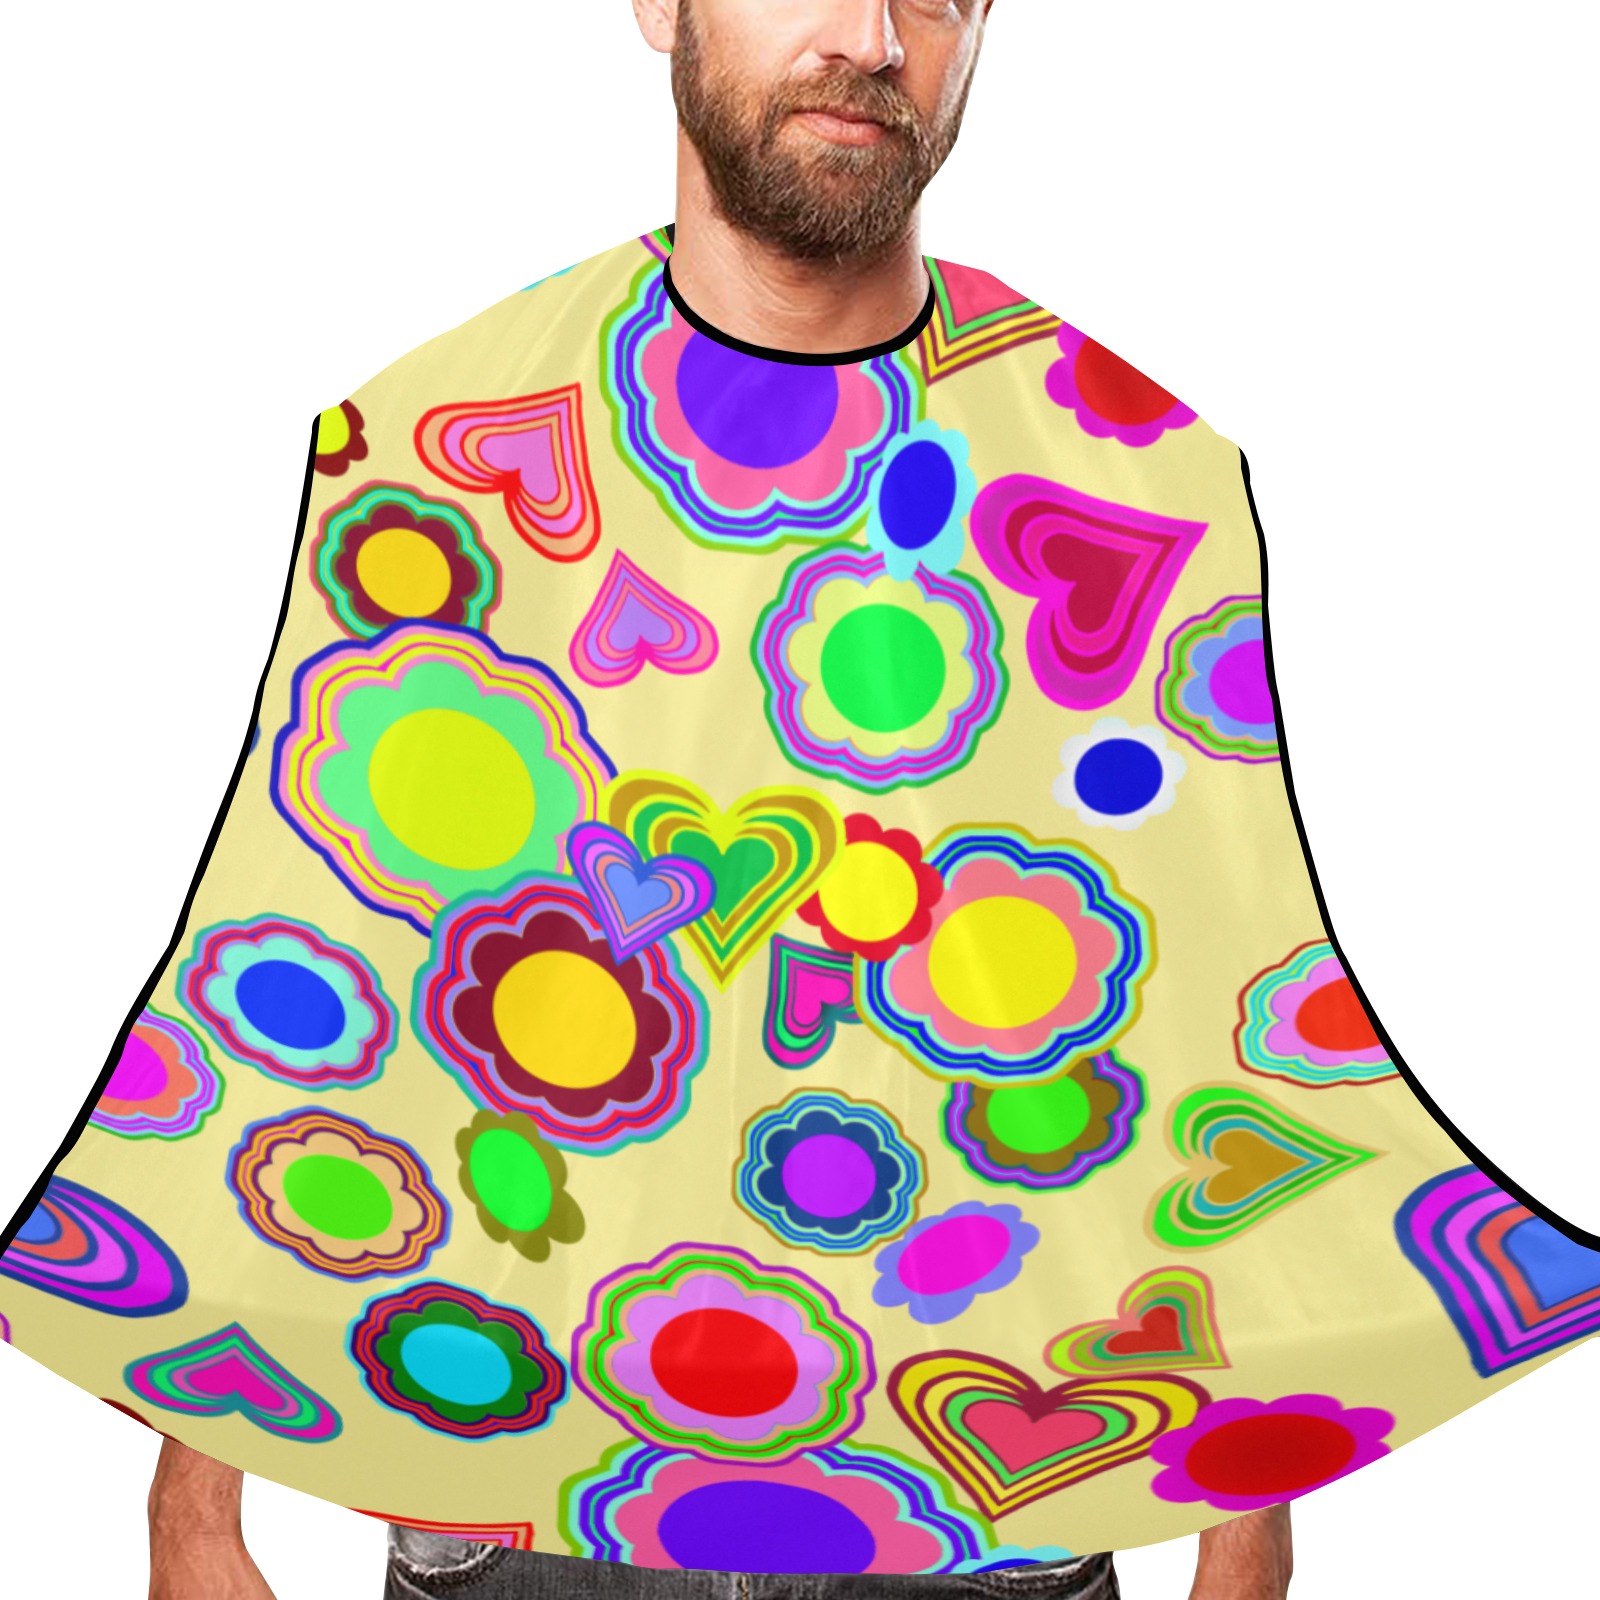 Groovy Hearts and Flowers Yellow Beard Bib Apron for Men Shaving & Trimming